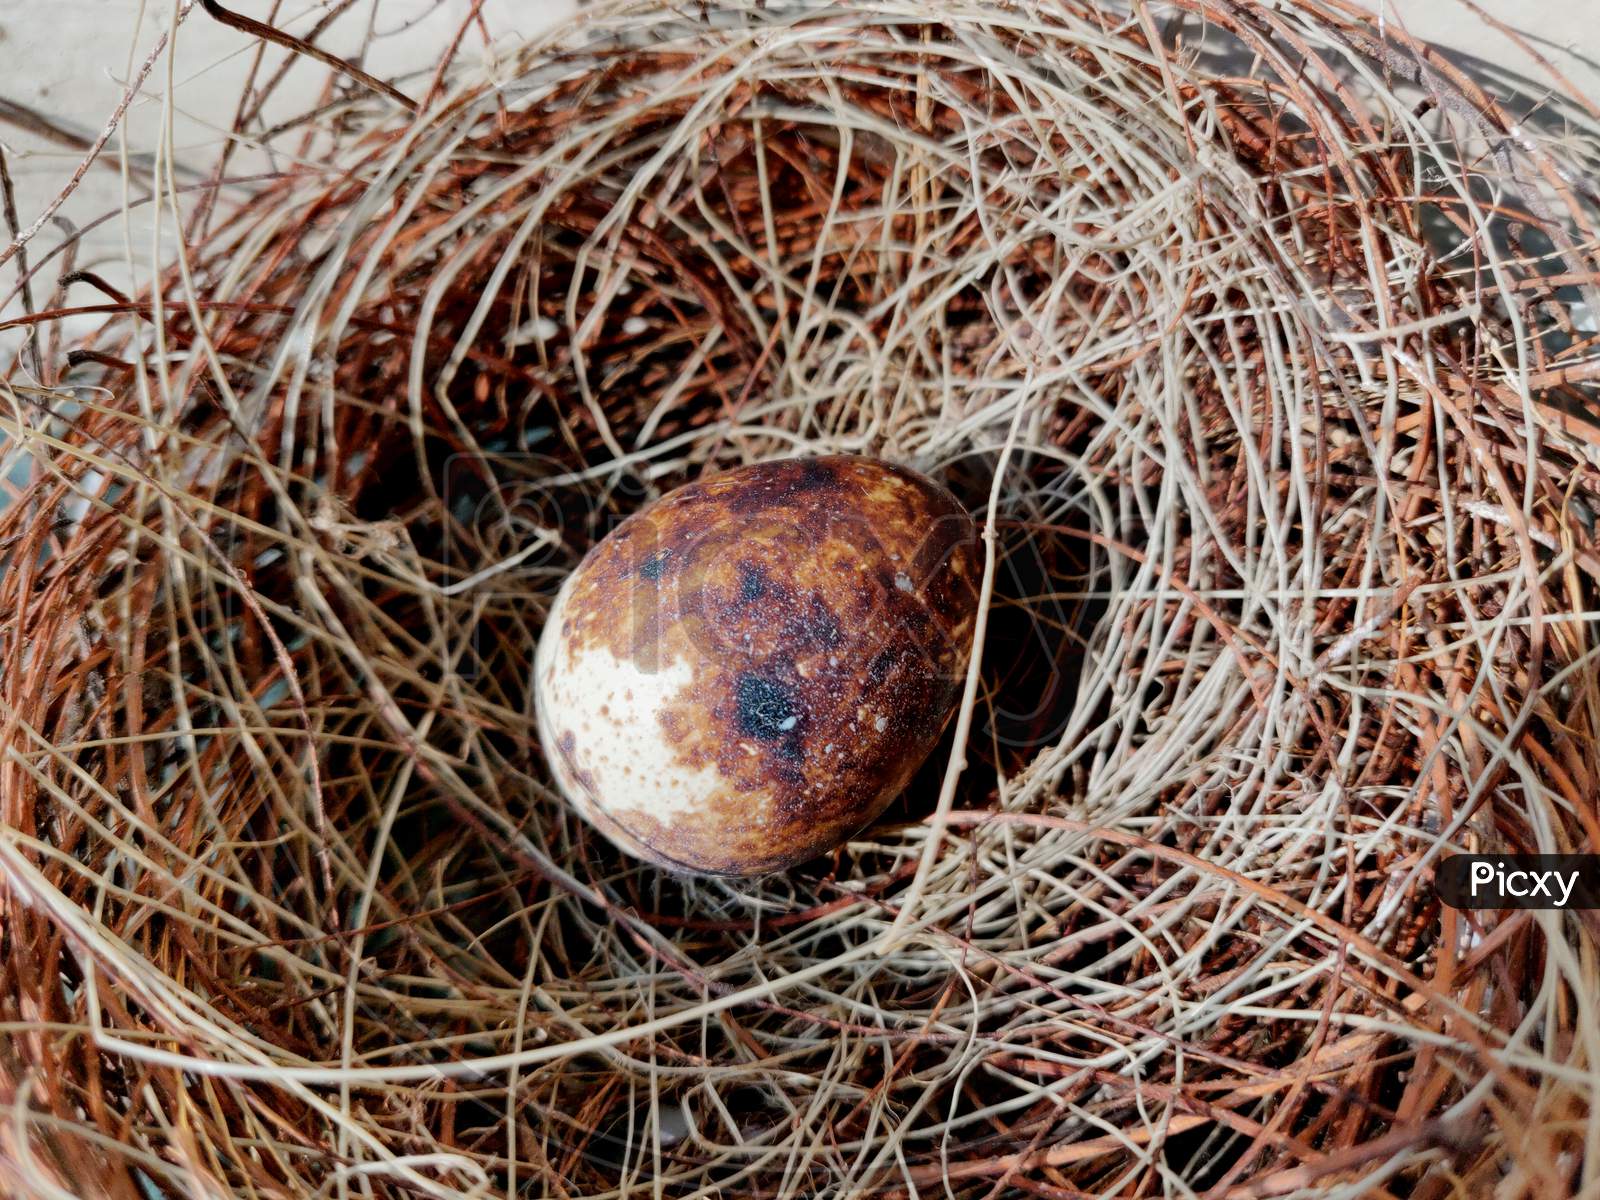 Common Quail Bird Egg, Quail Eggs Are Considered A Delicacy In Many Parts Of The World